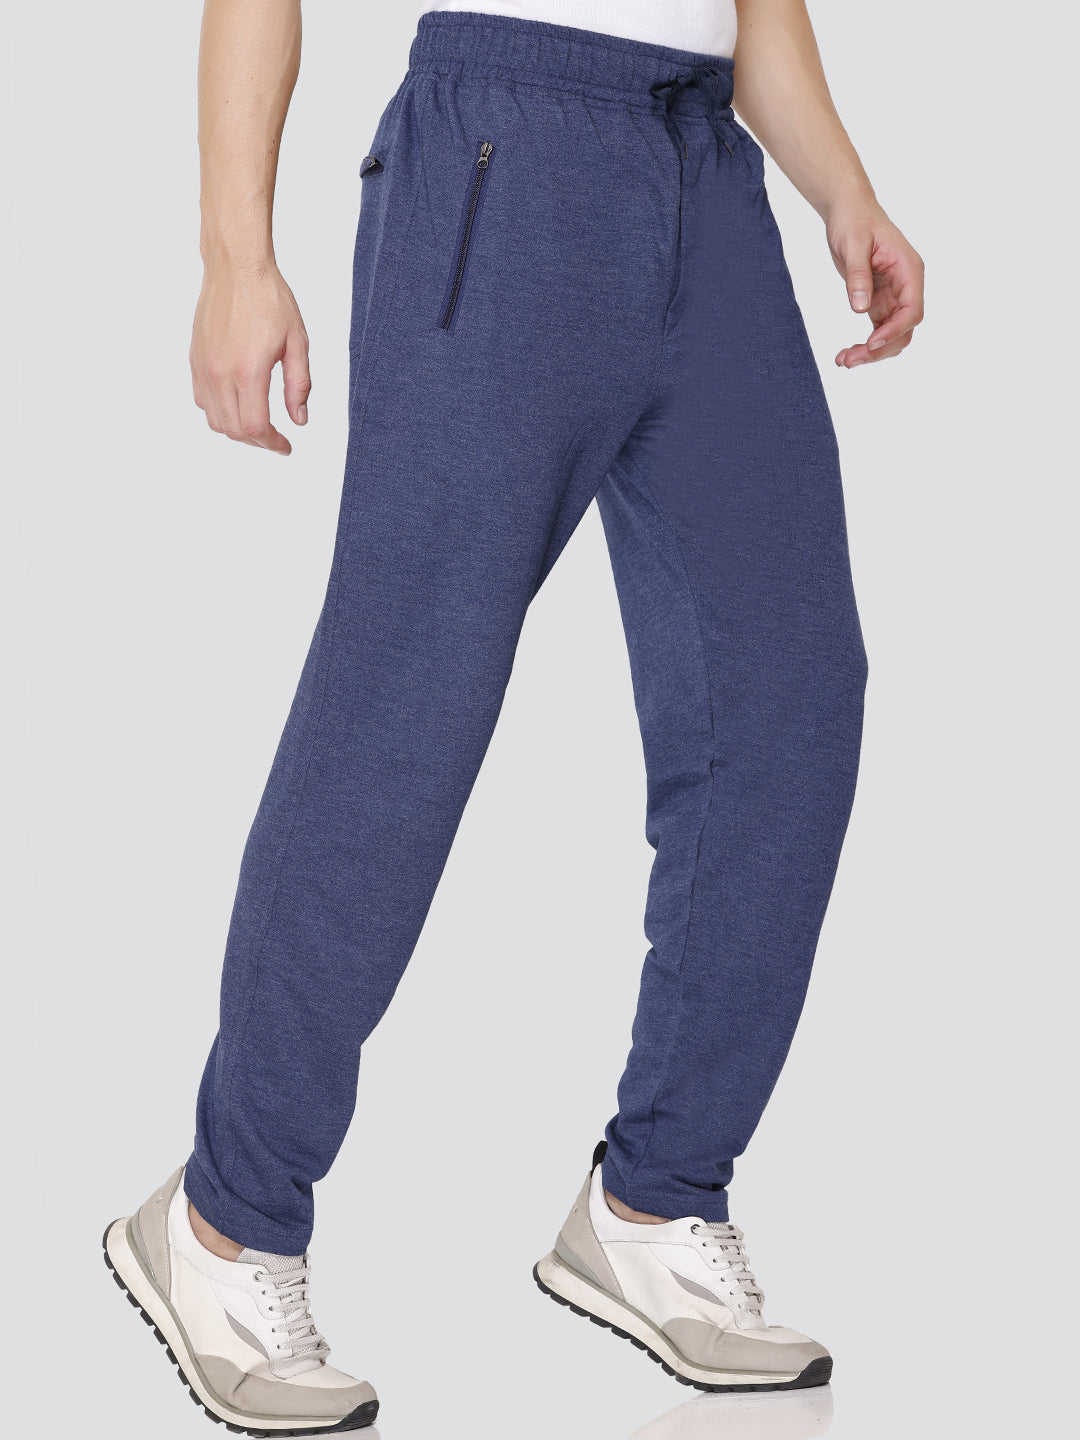 Stylish Jinxer Plus size Men's Cotton Trackpants(M TO 5 XL) online in India 